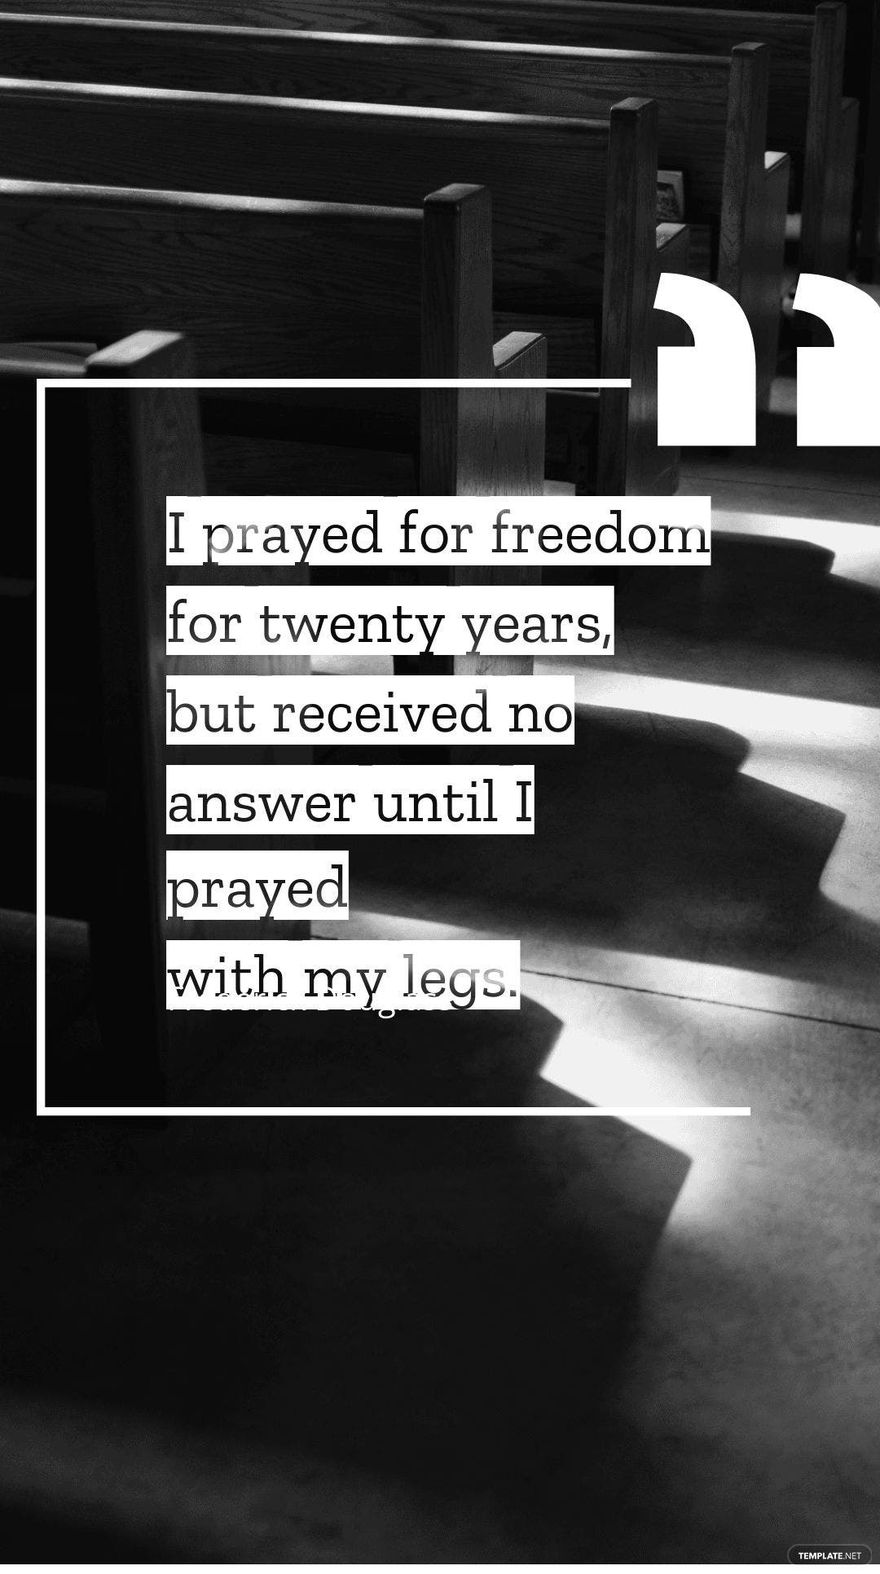 Frederick Douglass - I prayed for freedom for twenty years, but received no answer until I prayed with my legs. in JPG